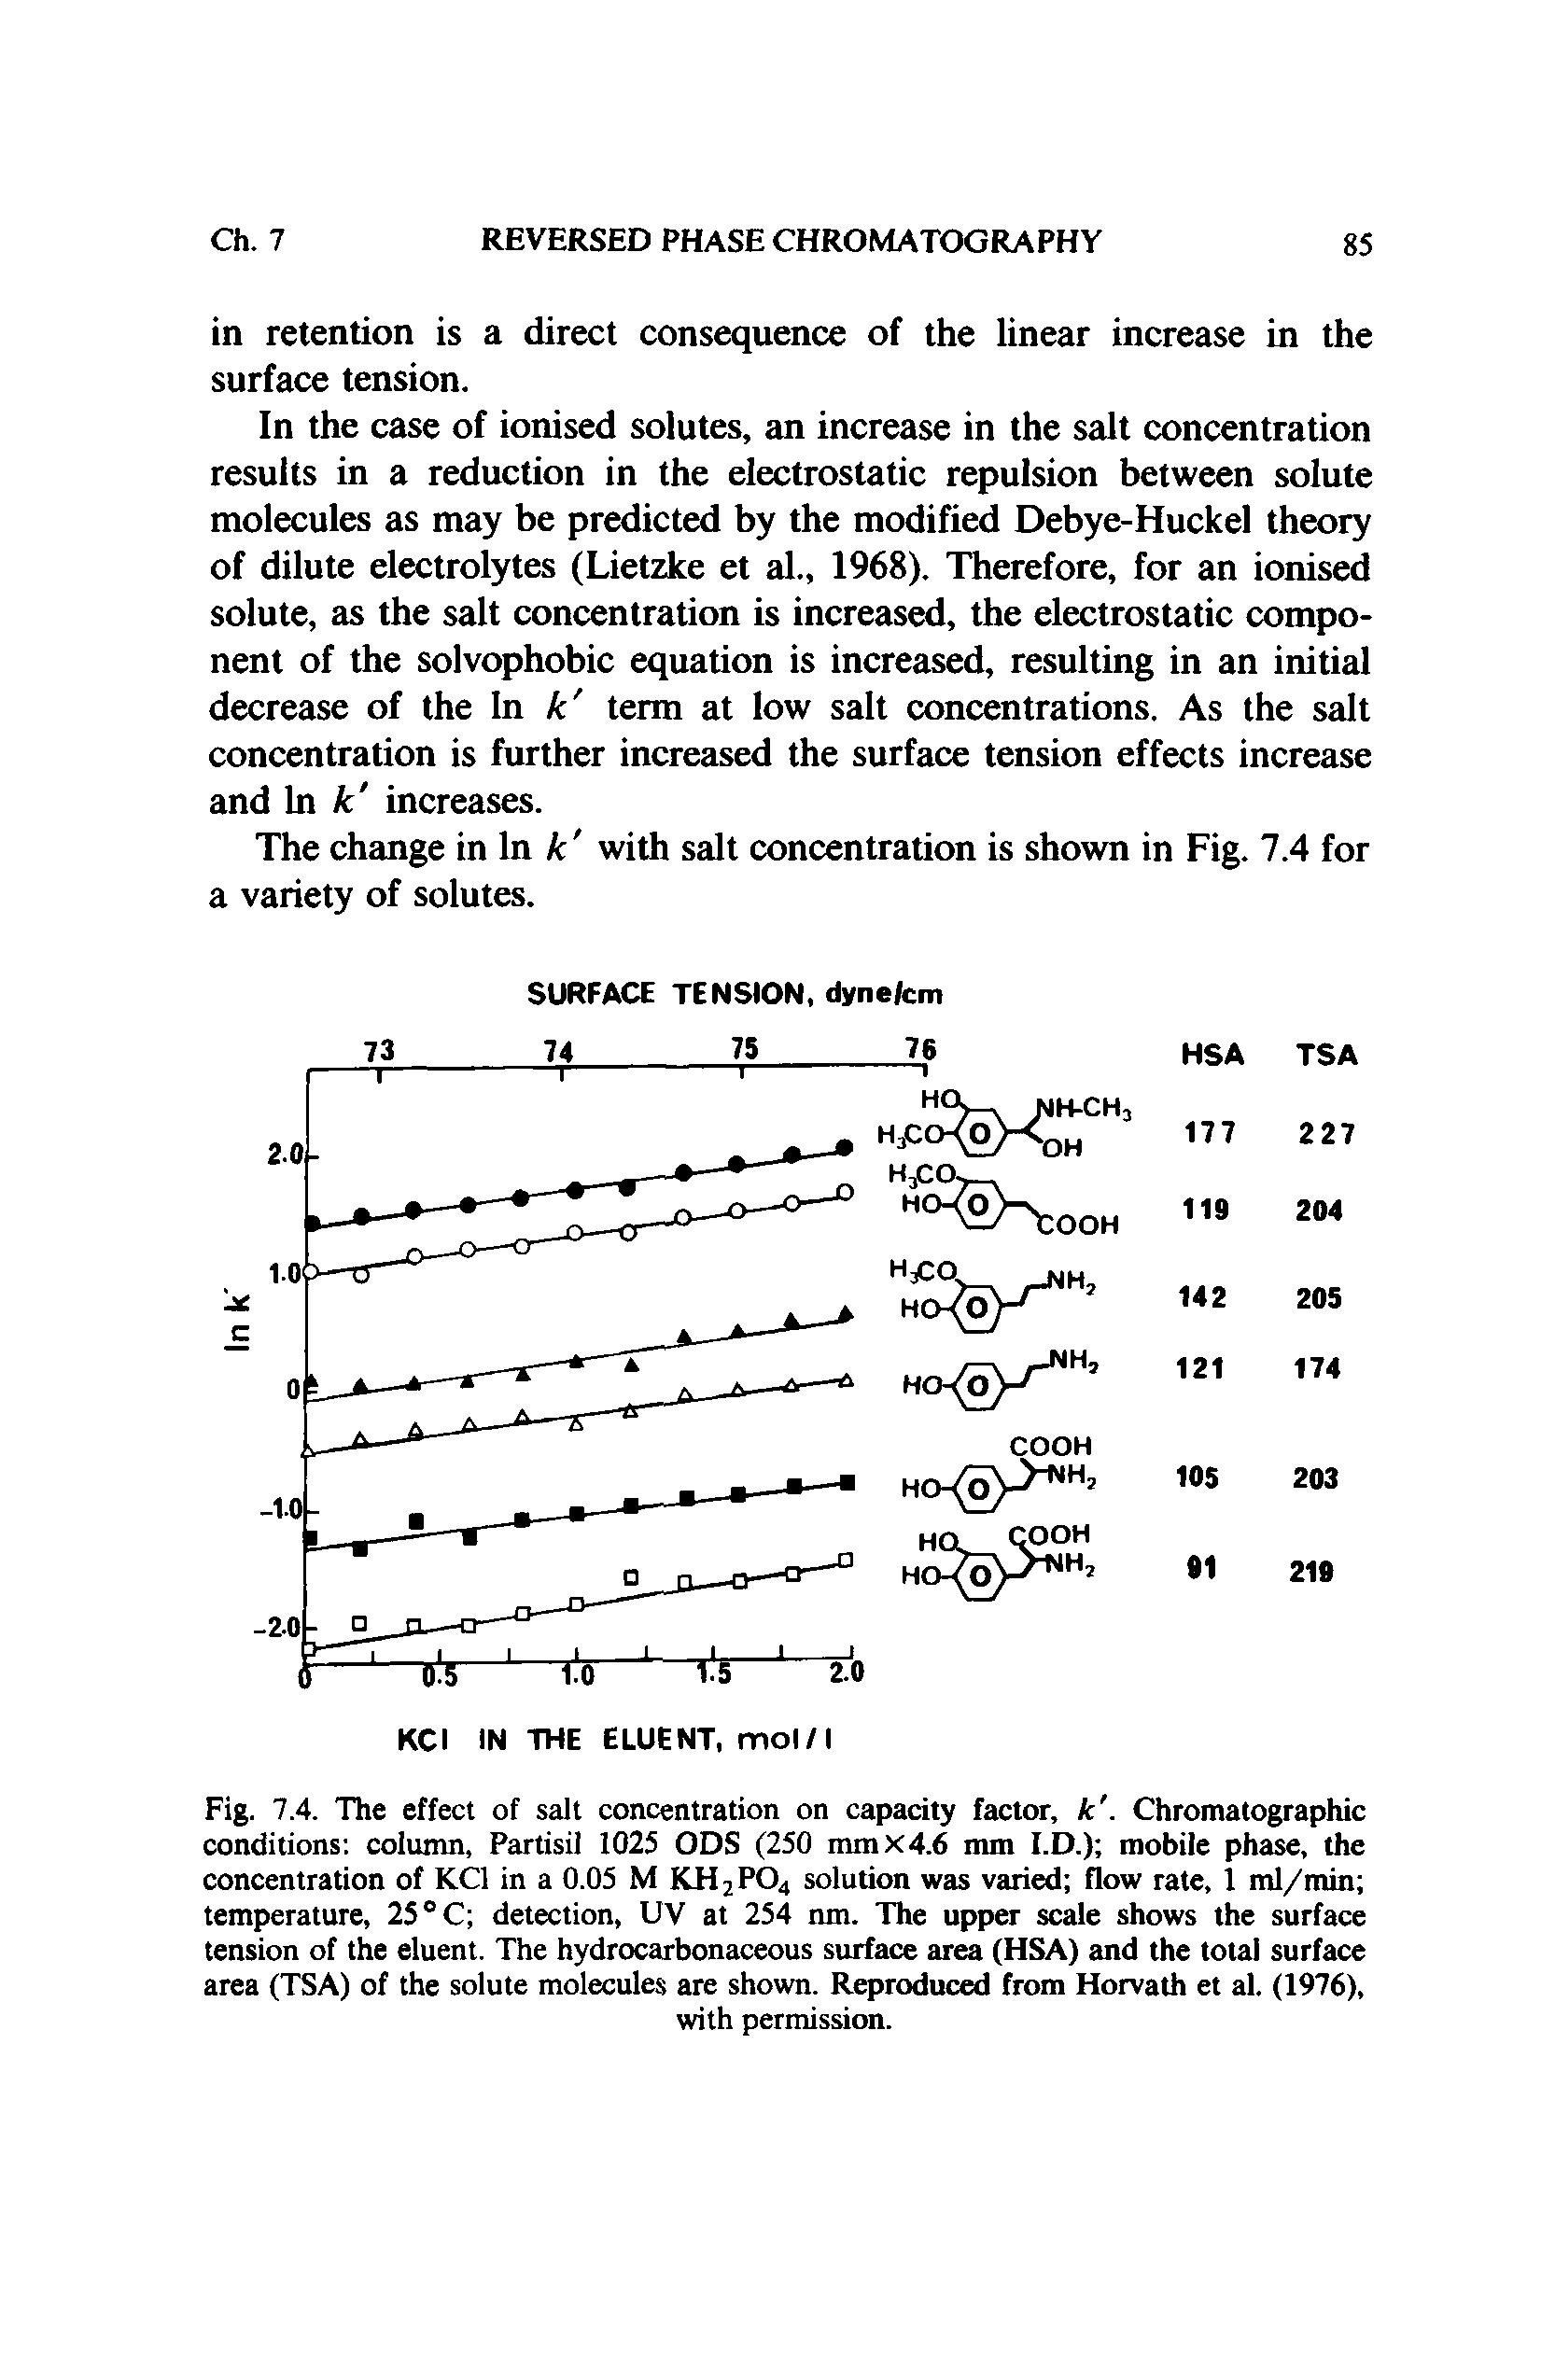 Fig. 7.4. The effect of salt concentration on capacity factor, k. Chromatographic conditions column, Partisil 1025 ODS (250 mmx4.6 mm I.D.) mobile phase, the concentration of KCl in a 0.05 M KH2PO4 solution was varied flow rate, 1 ml/min temperature, 25 °C detection, UV at 254 nm. The upper scale shows the surface tension of the eluent. The hydrocarbonaceous surface area (HSA) and the total surface area (TSA) of the solute molecules are shown. Reproduced from Horvath et al. (1976),...